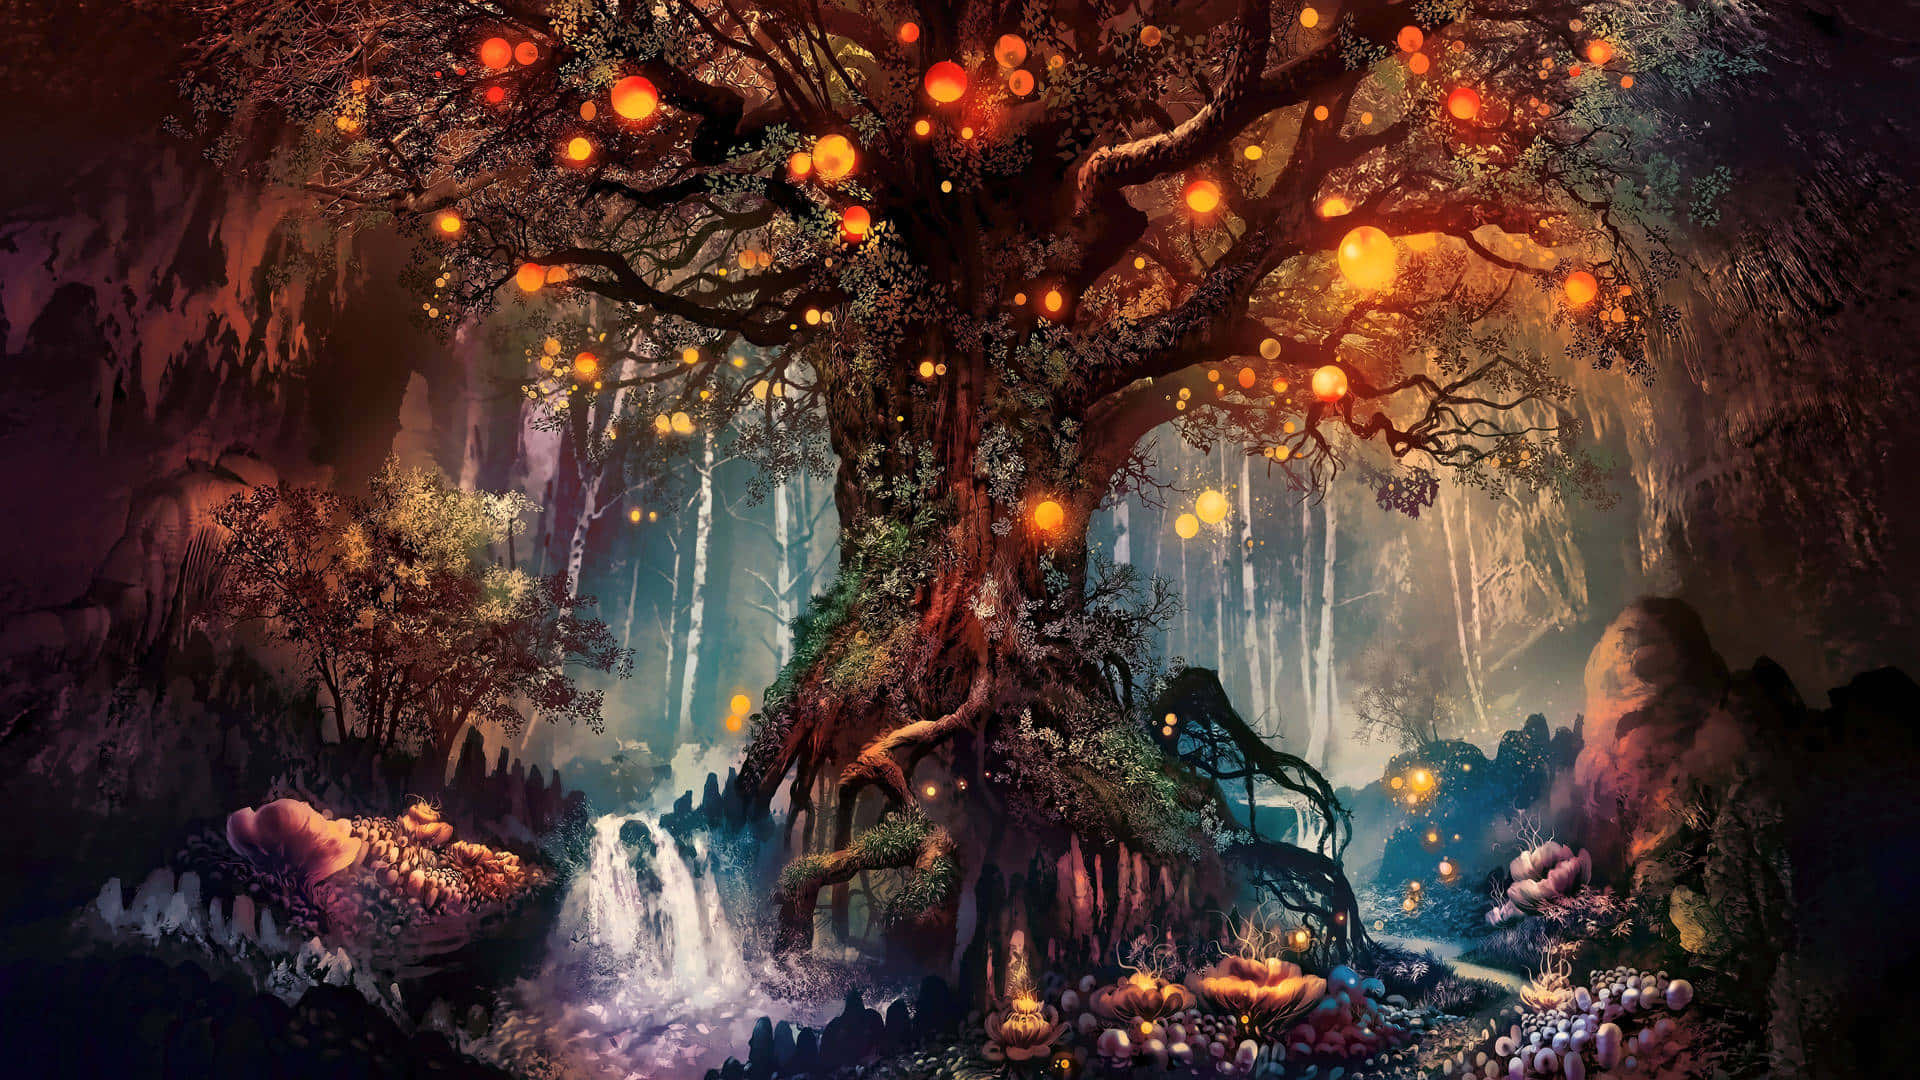 A Tree With Many Lanterns In The Forest Wallpaper